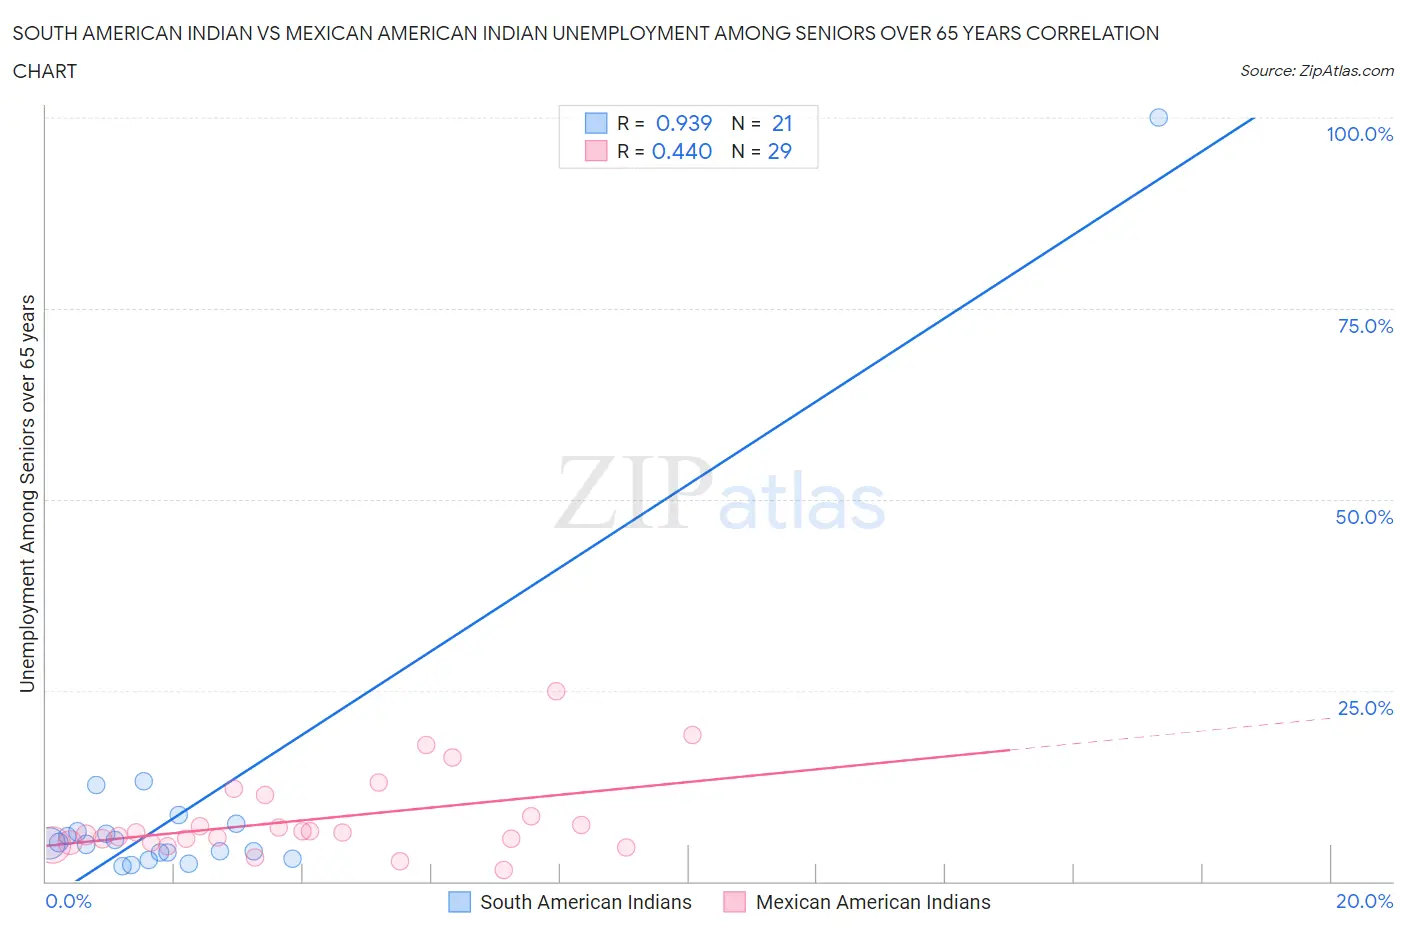 South American Indian vs Mexican American Indian Unemployment Among Seniors over 65 years